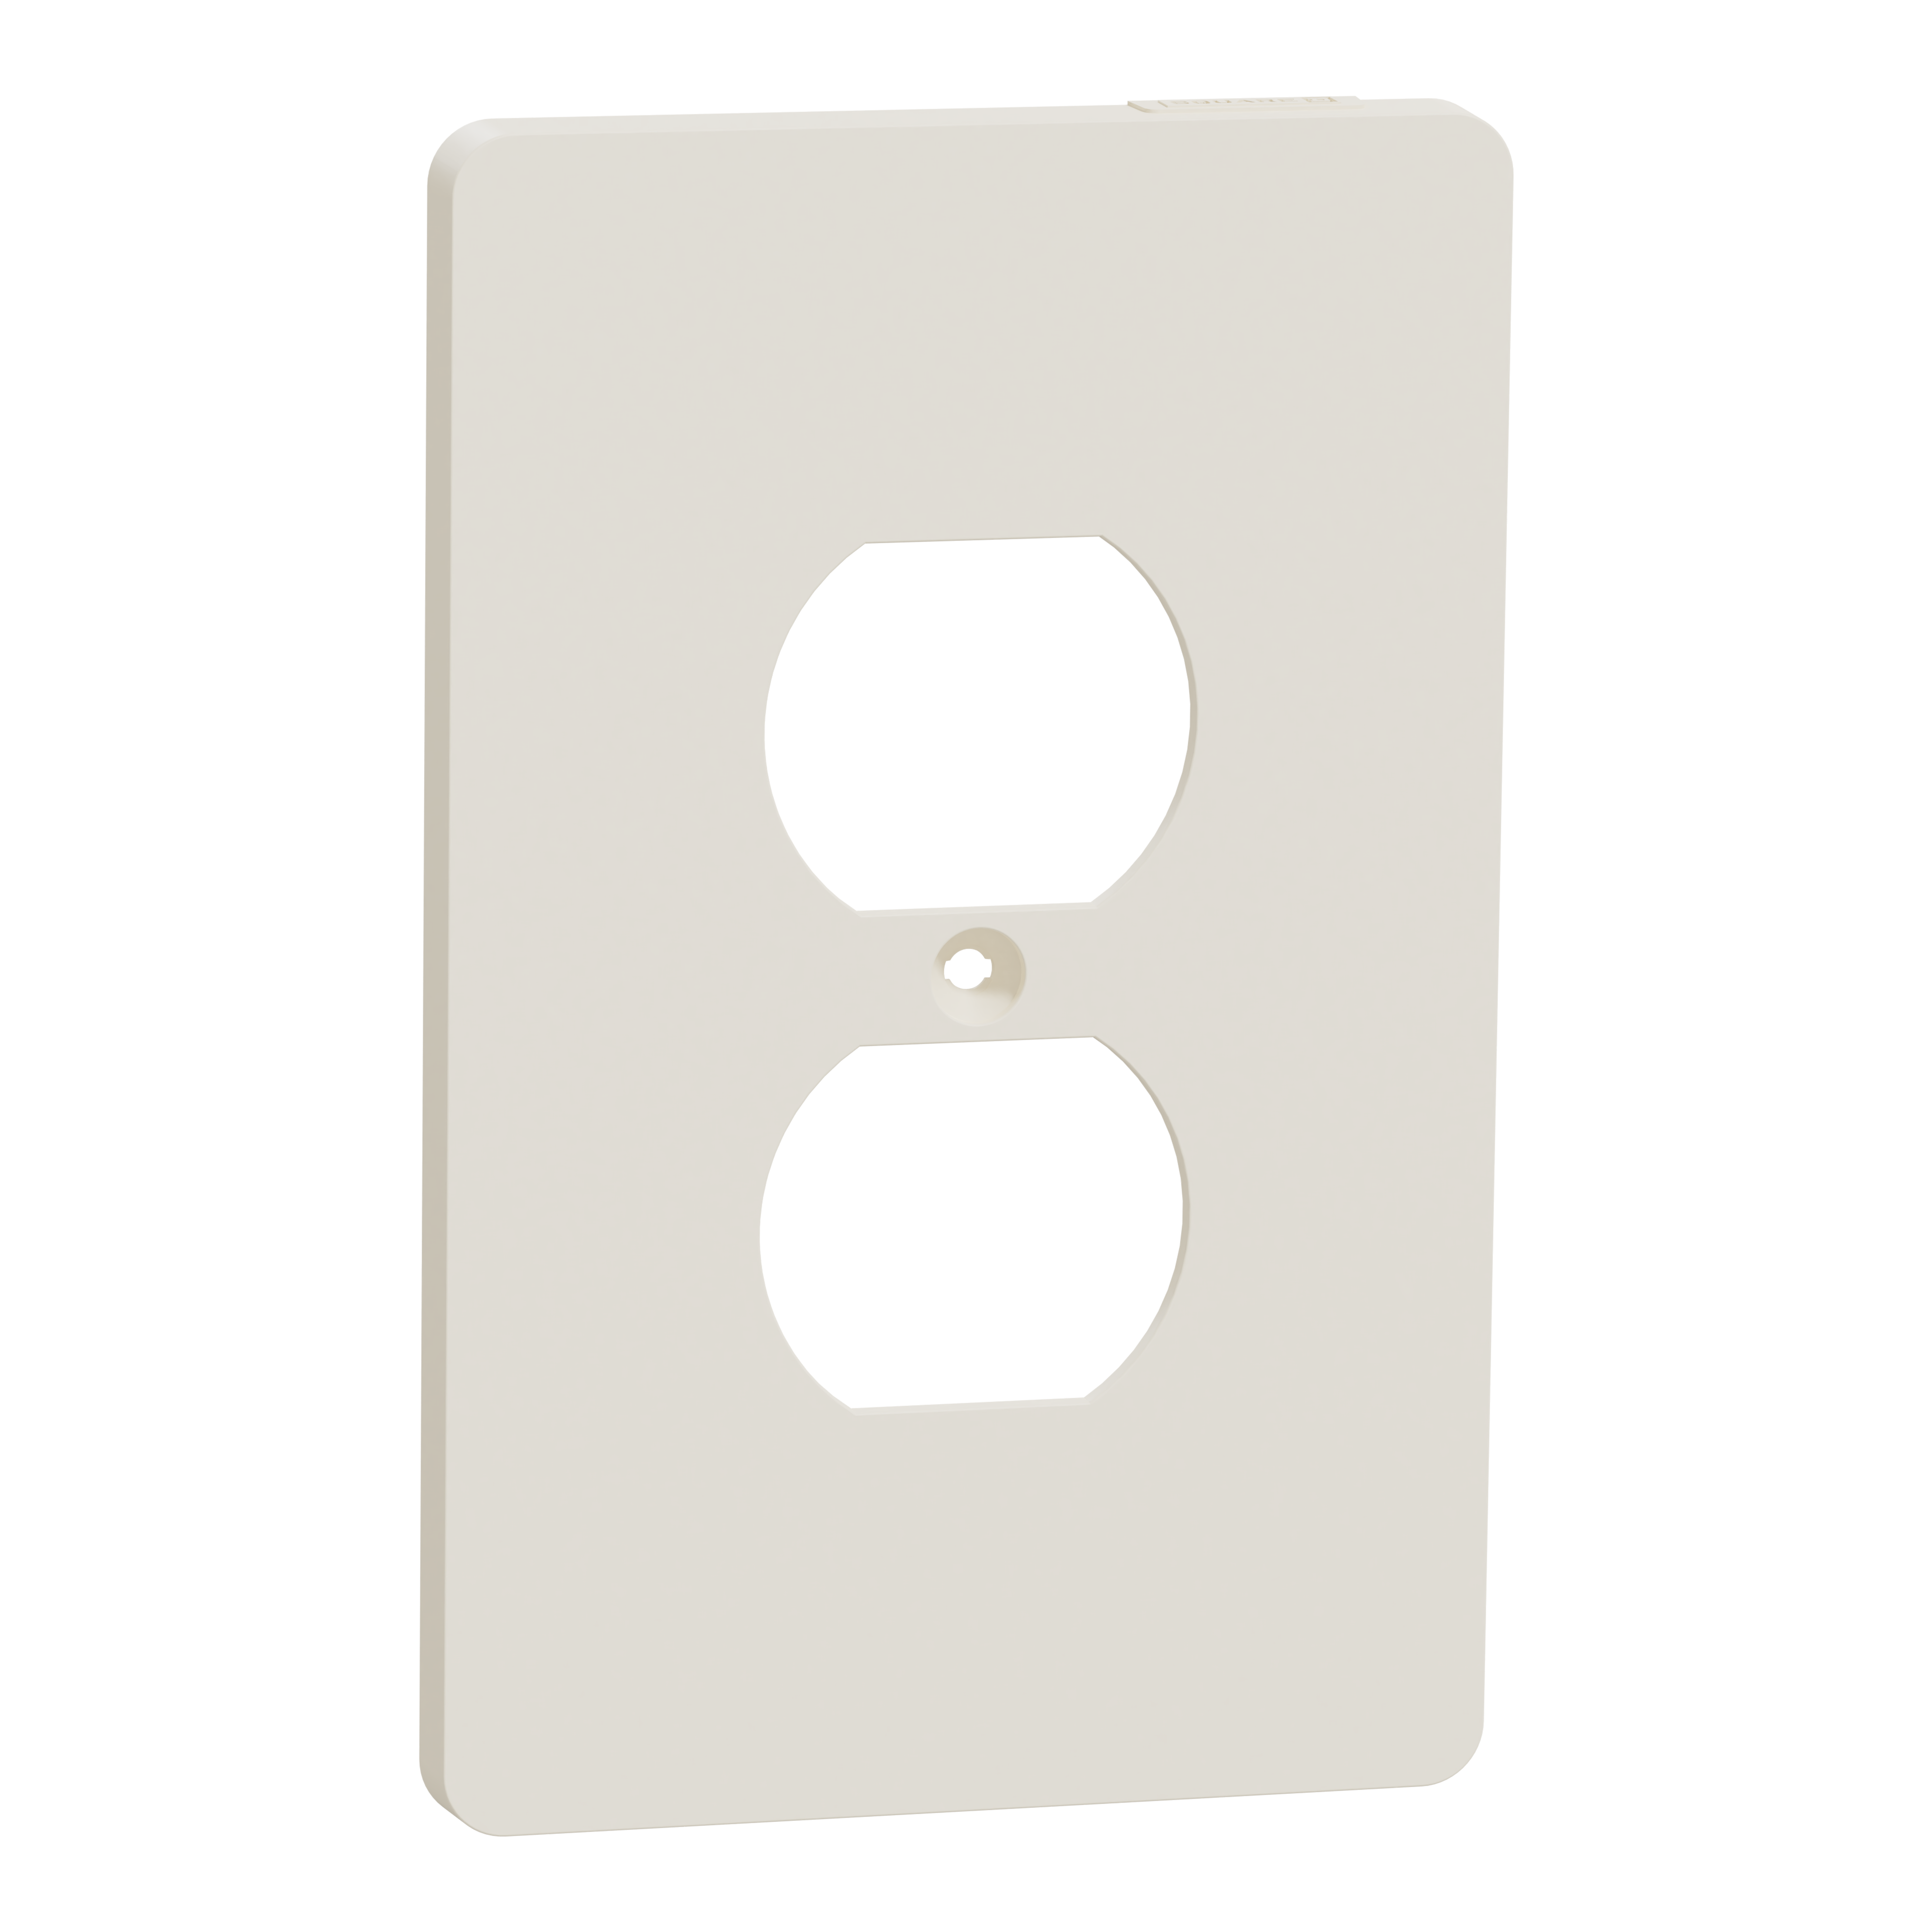 Cover frame, X Series, for duplex socket-outlet, 1 gang, screw fixed, mid sized plus, light almond, matte finish